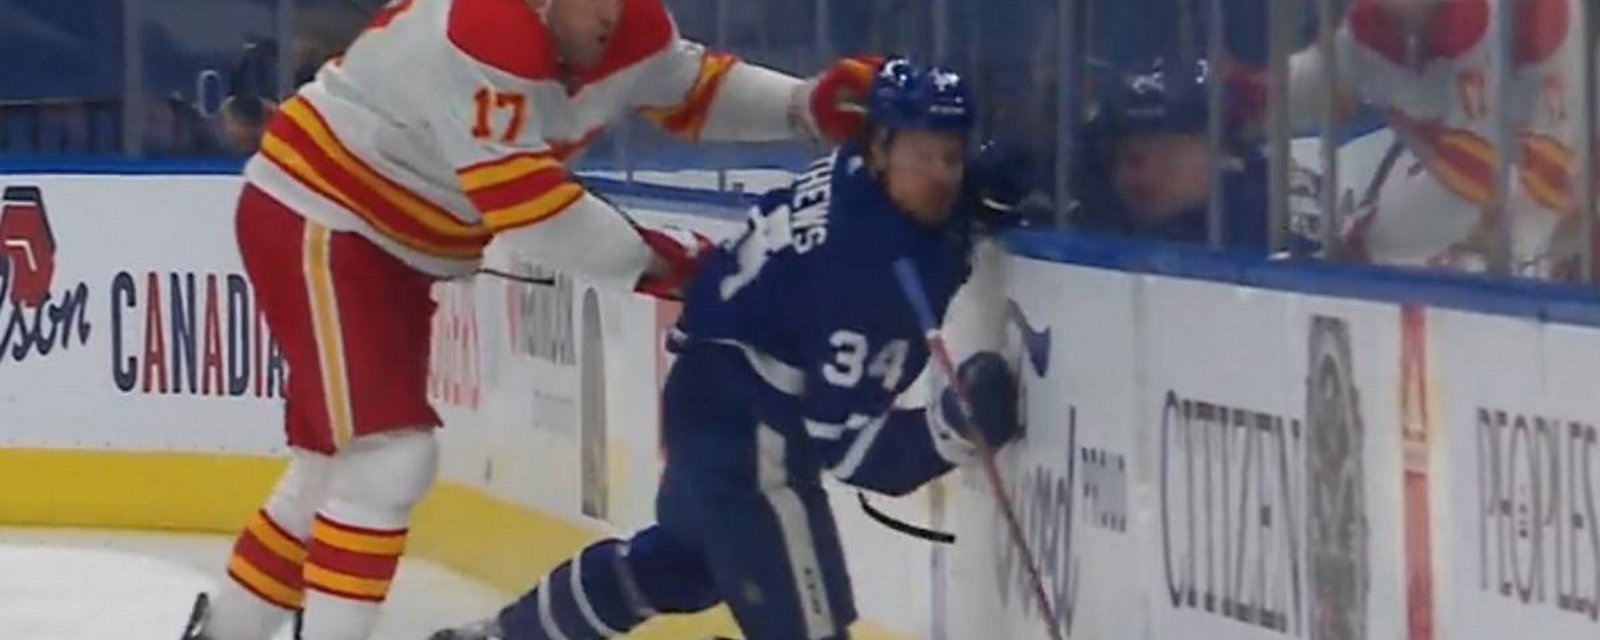 Milan Lucic sends Auston Matthews into the boards with a hit from behind.